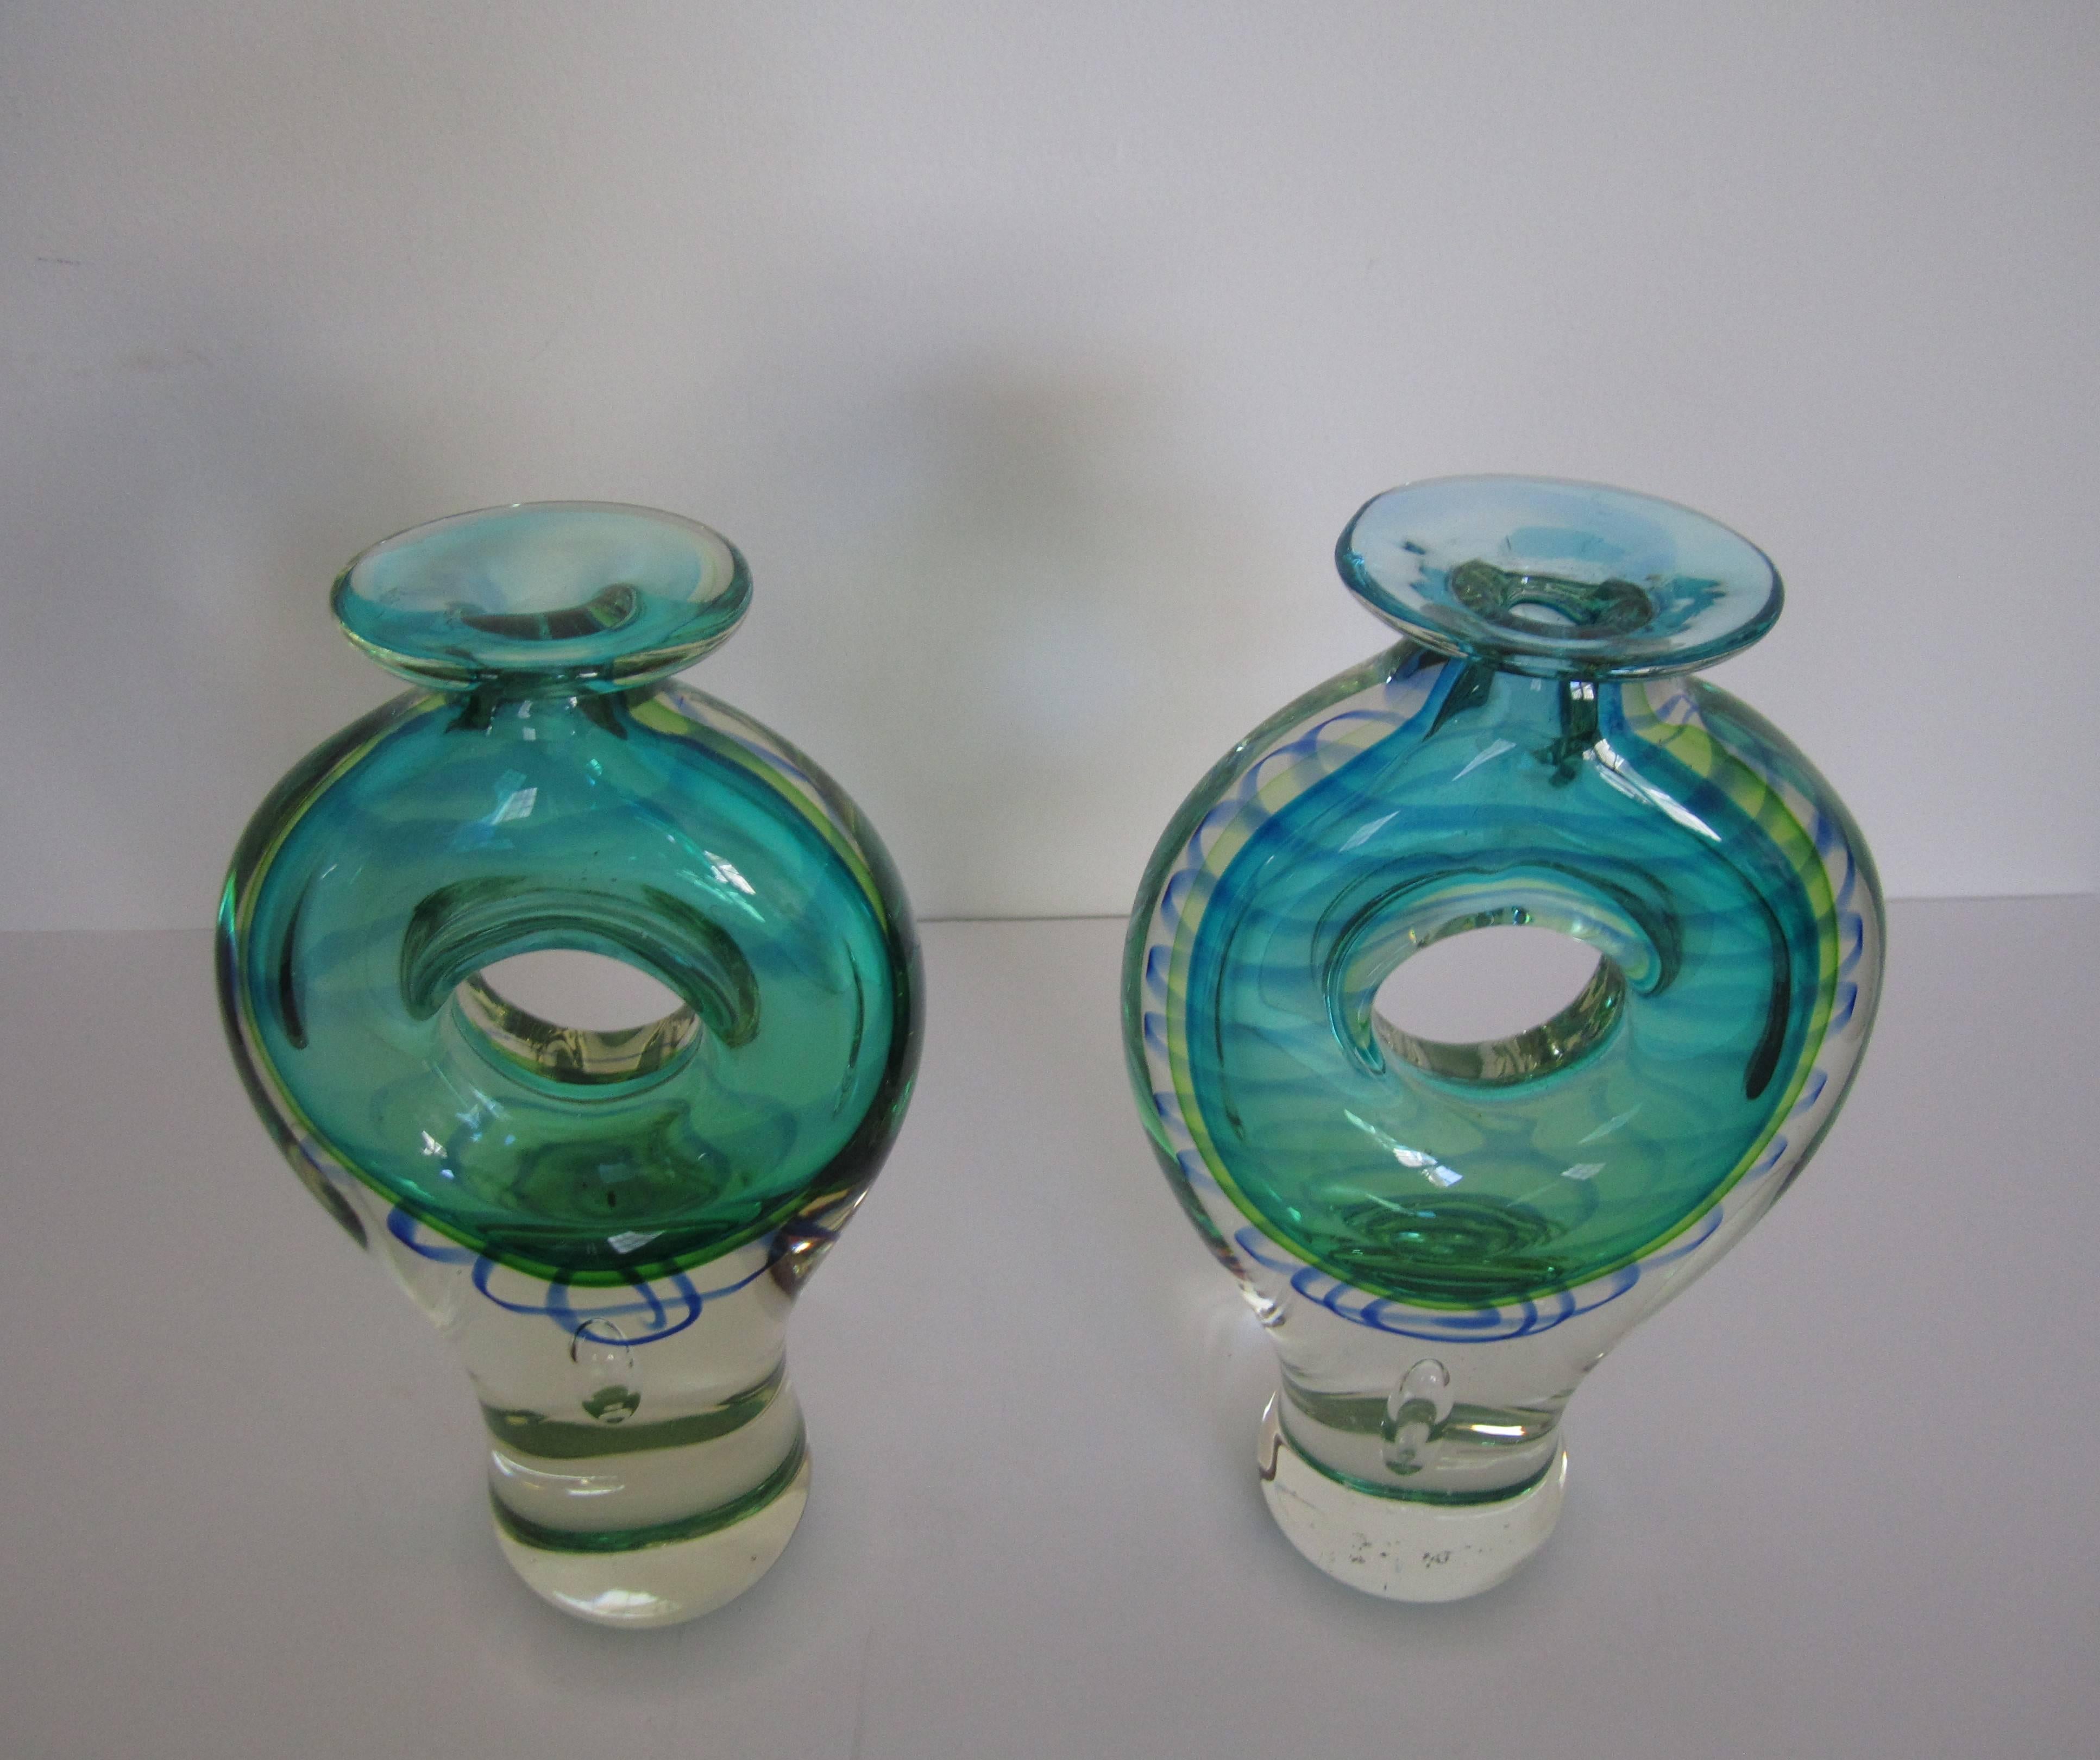 Pair of Modern Blue and Green Art Glass Vessels or Vases 1